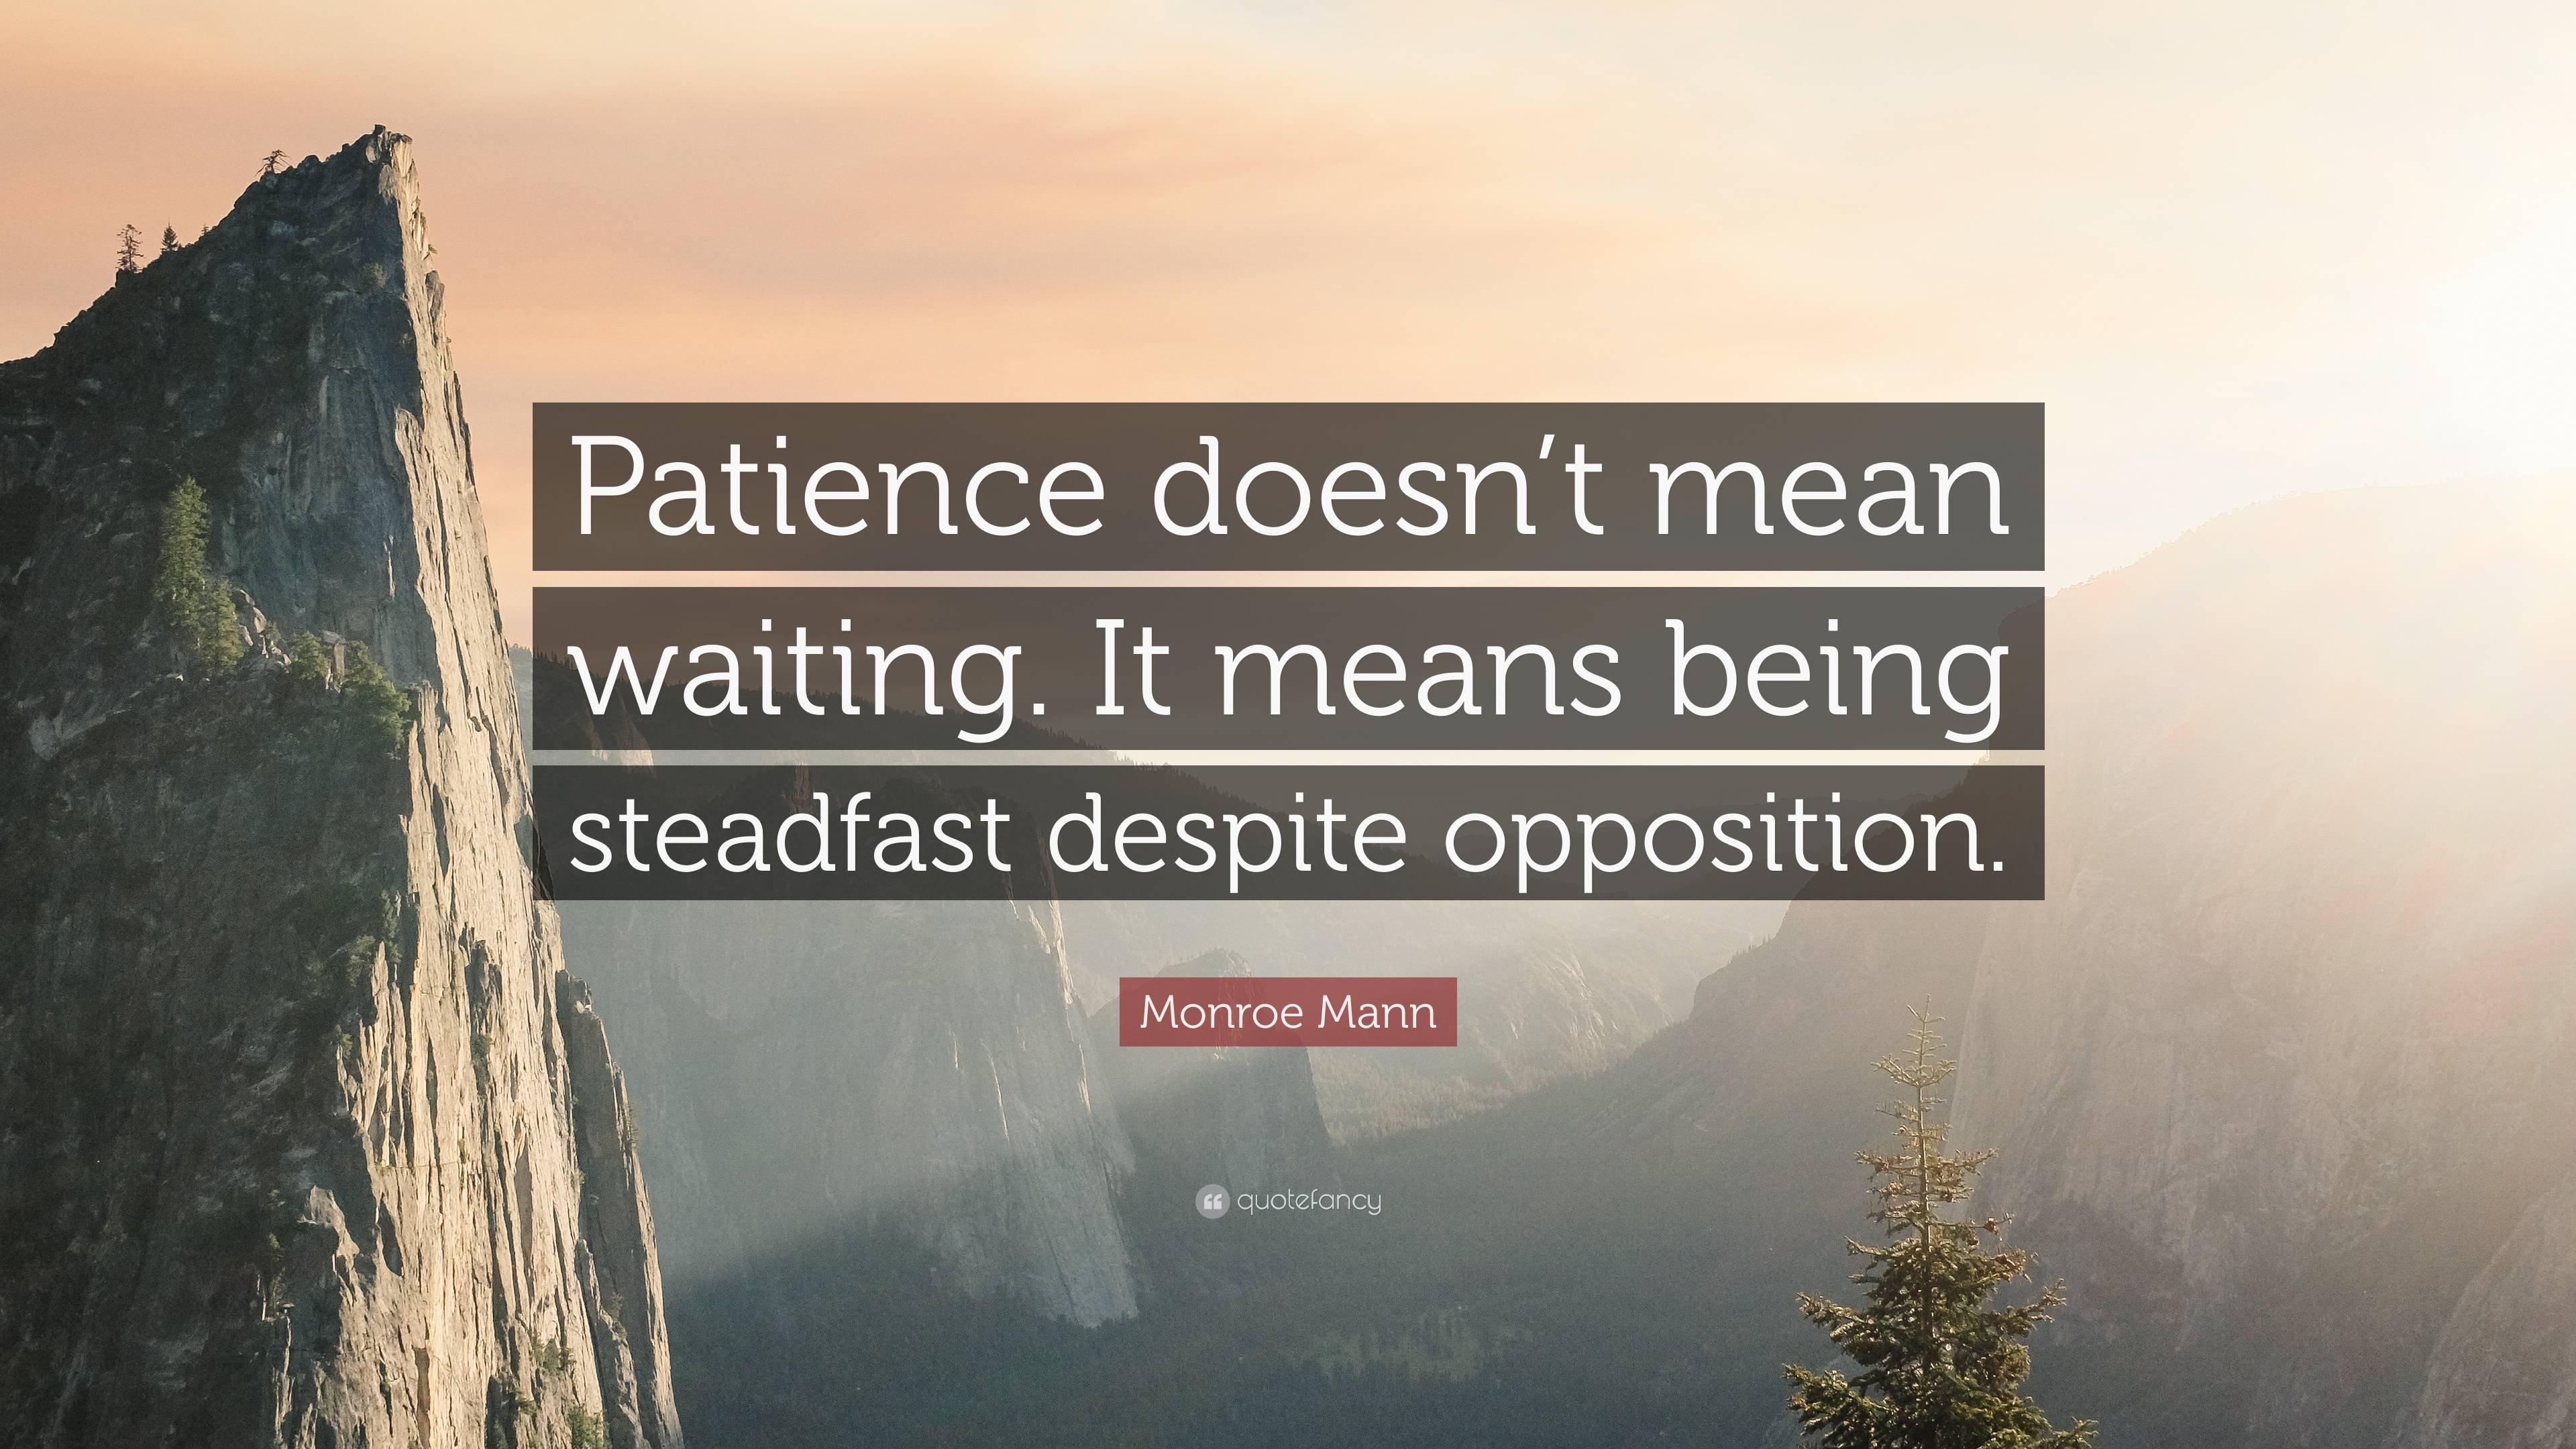 Monroe Mann Quote: “Patience doesn't mean waiting. It means being